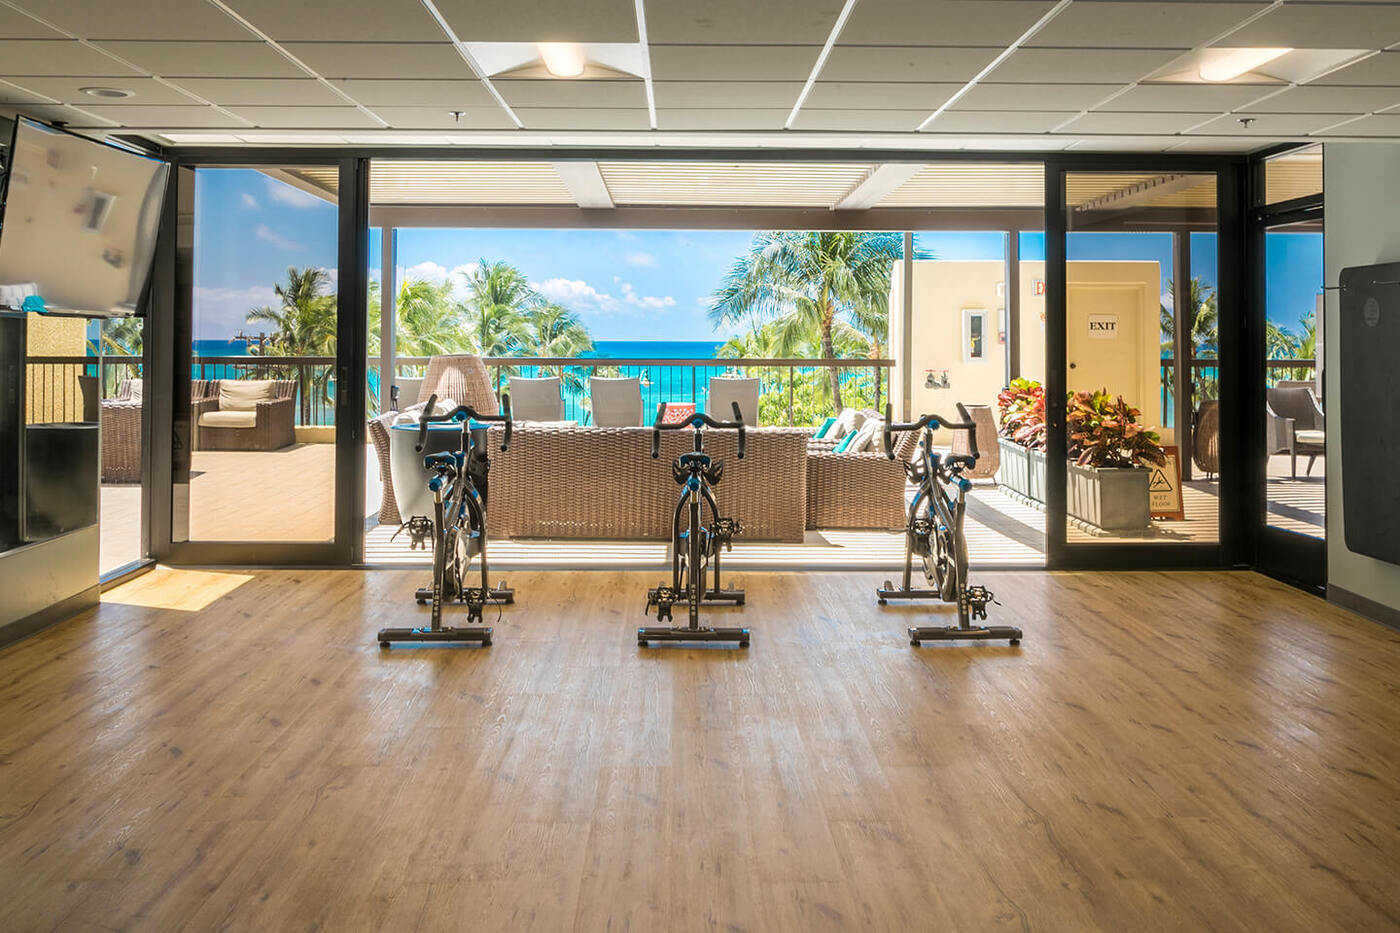 Exercise Bikes in the Fitness Center